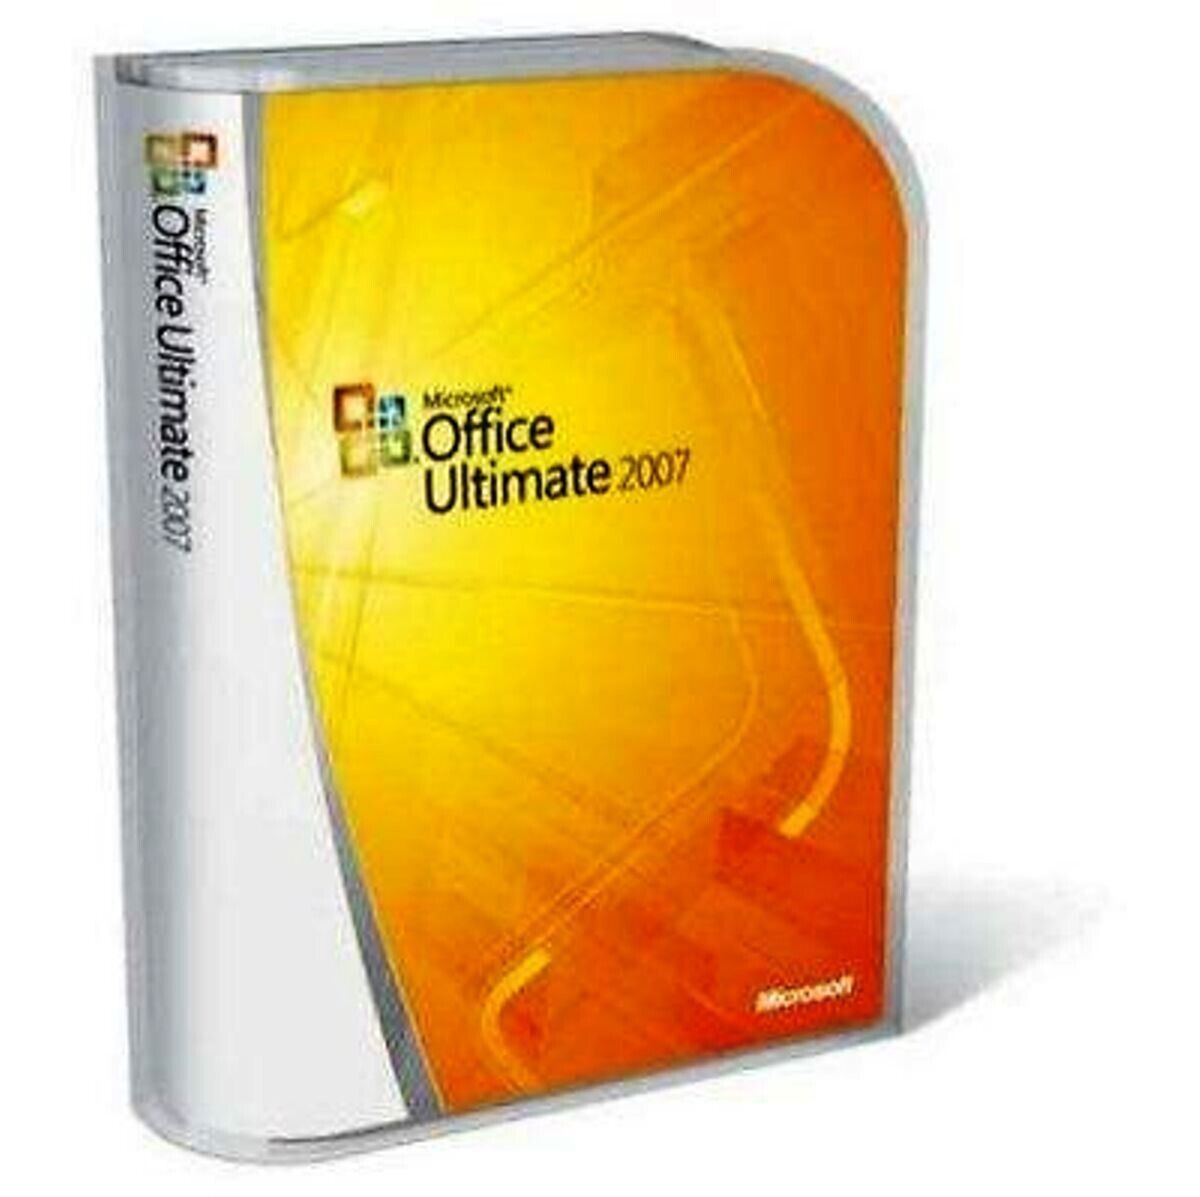 Microsoft Office Ultimate 2007 & Project Visio Professional Accounting 2008